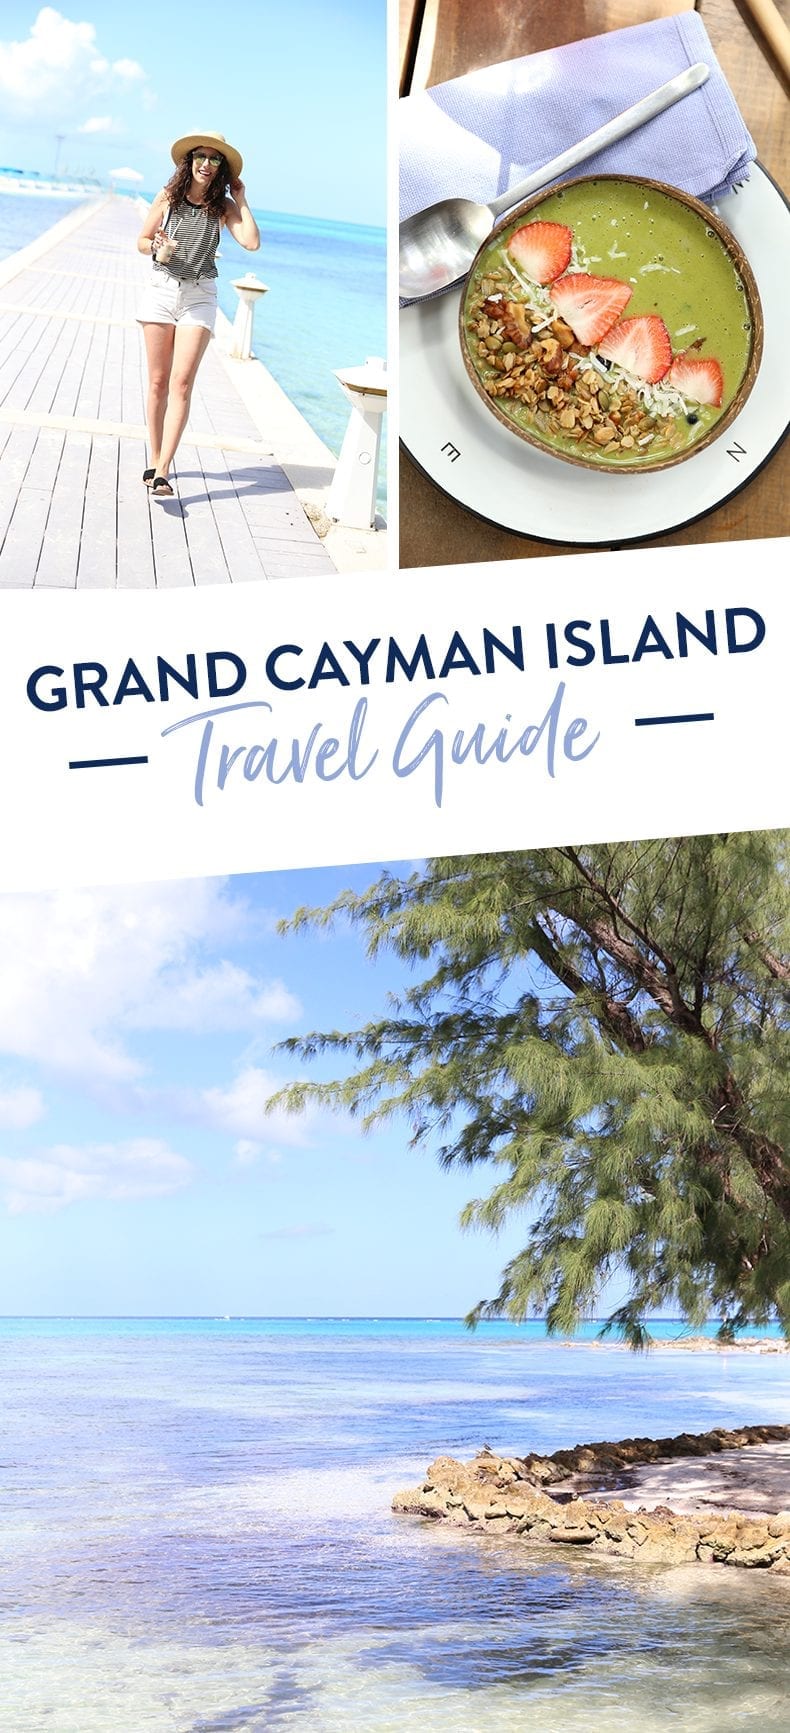 Visiting Grand Cayman for the first time? Here is a full travel guide on what to do in Grand Cayman along with the best restaurants, workouts and wellness tips for your next visit!